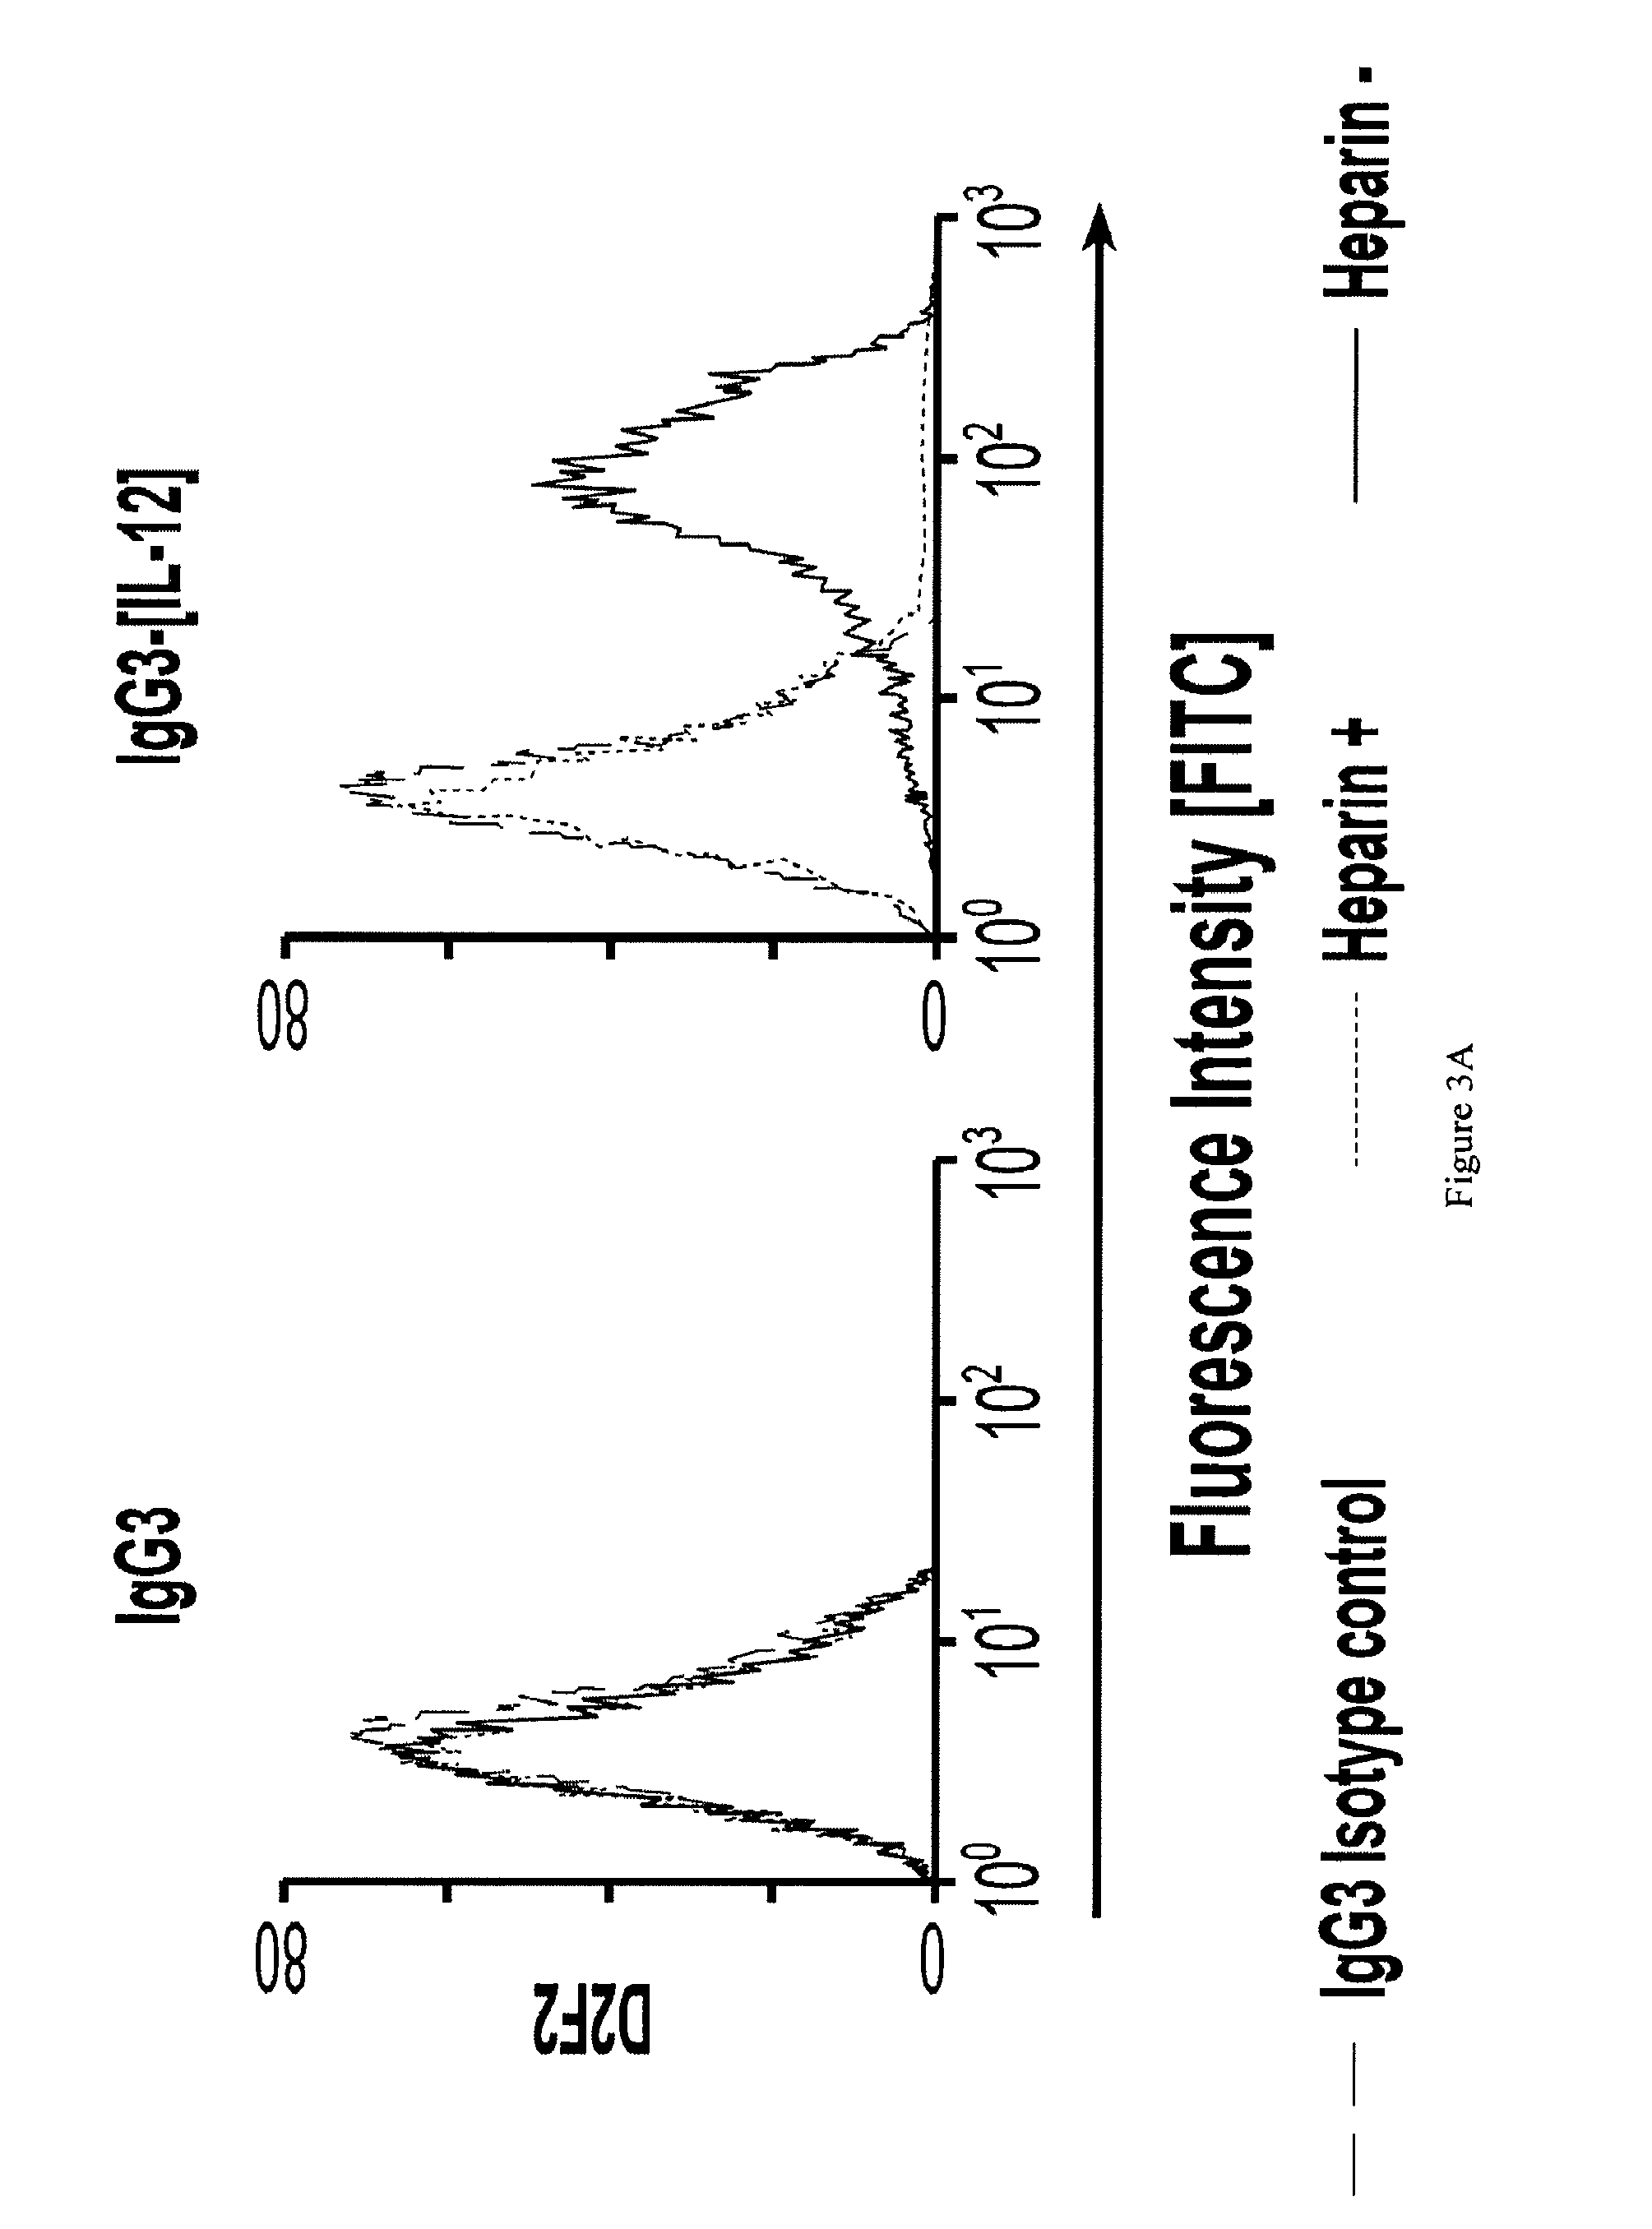 Antibody Fusion Proteins with Disrupted Heparin-Binding Activity